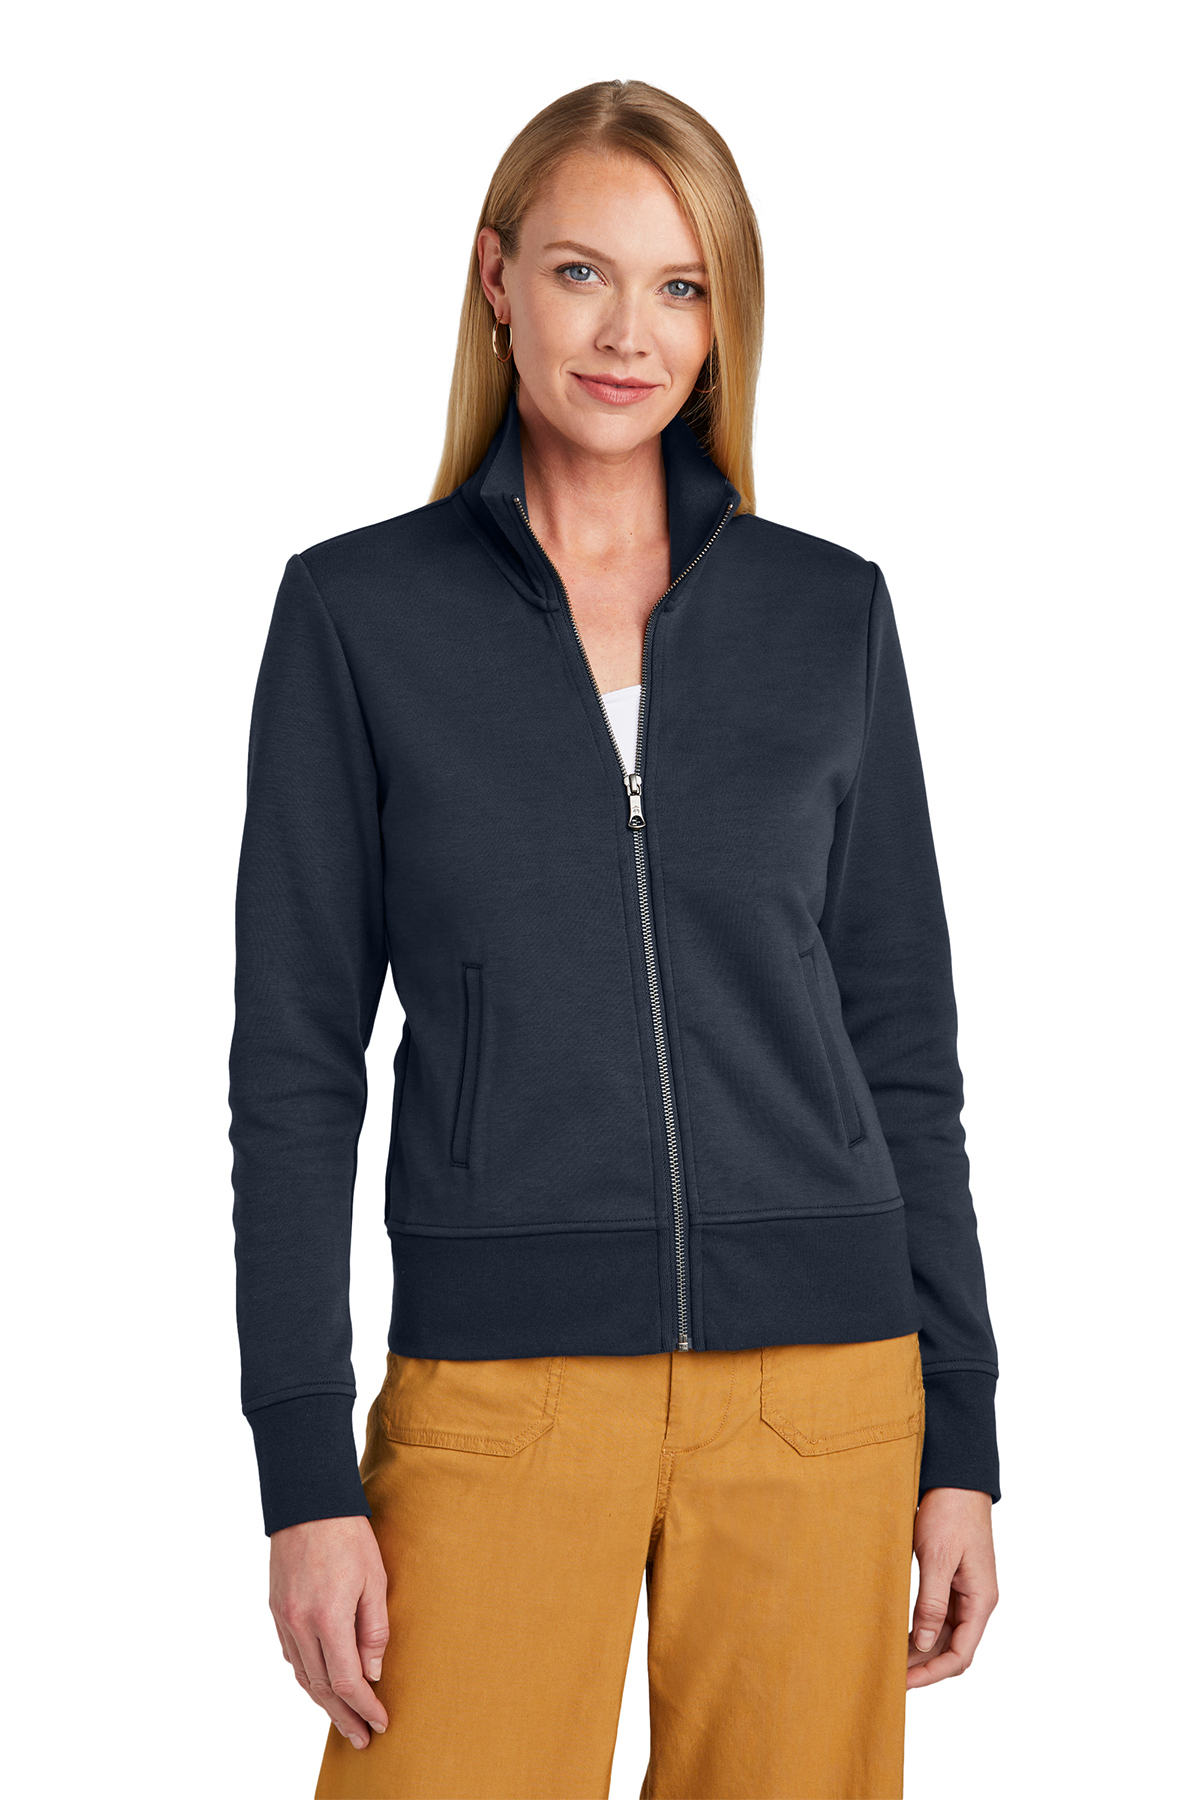 Brooks Brothers Women's Double-Knit Full-Zip | Product | SanMar